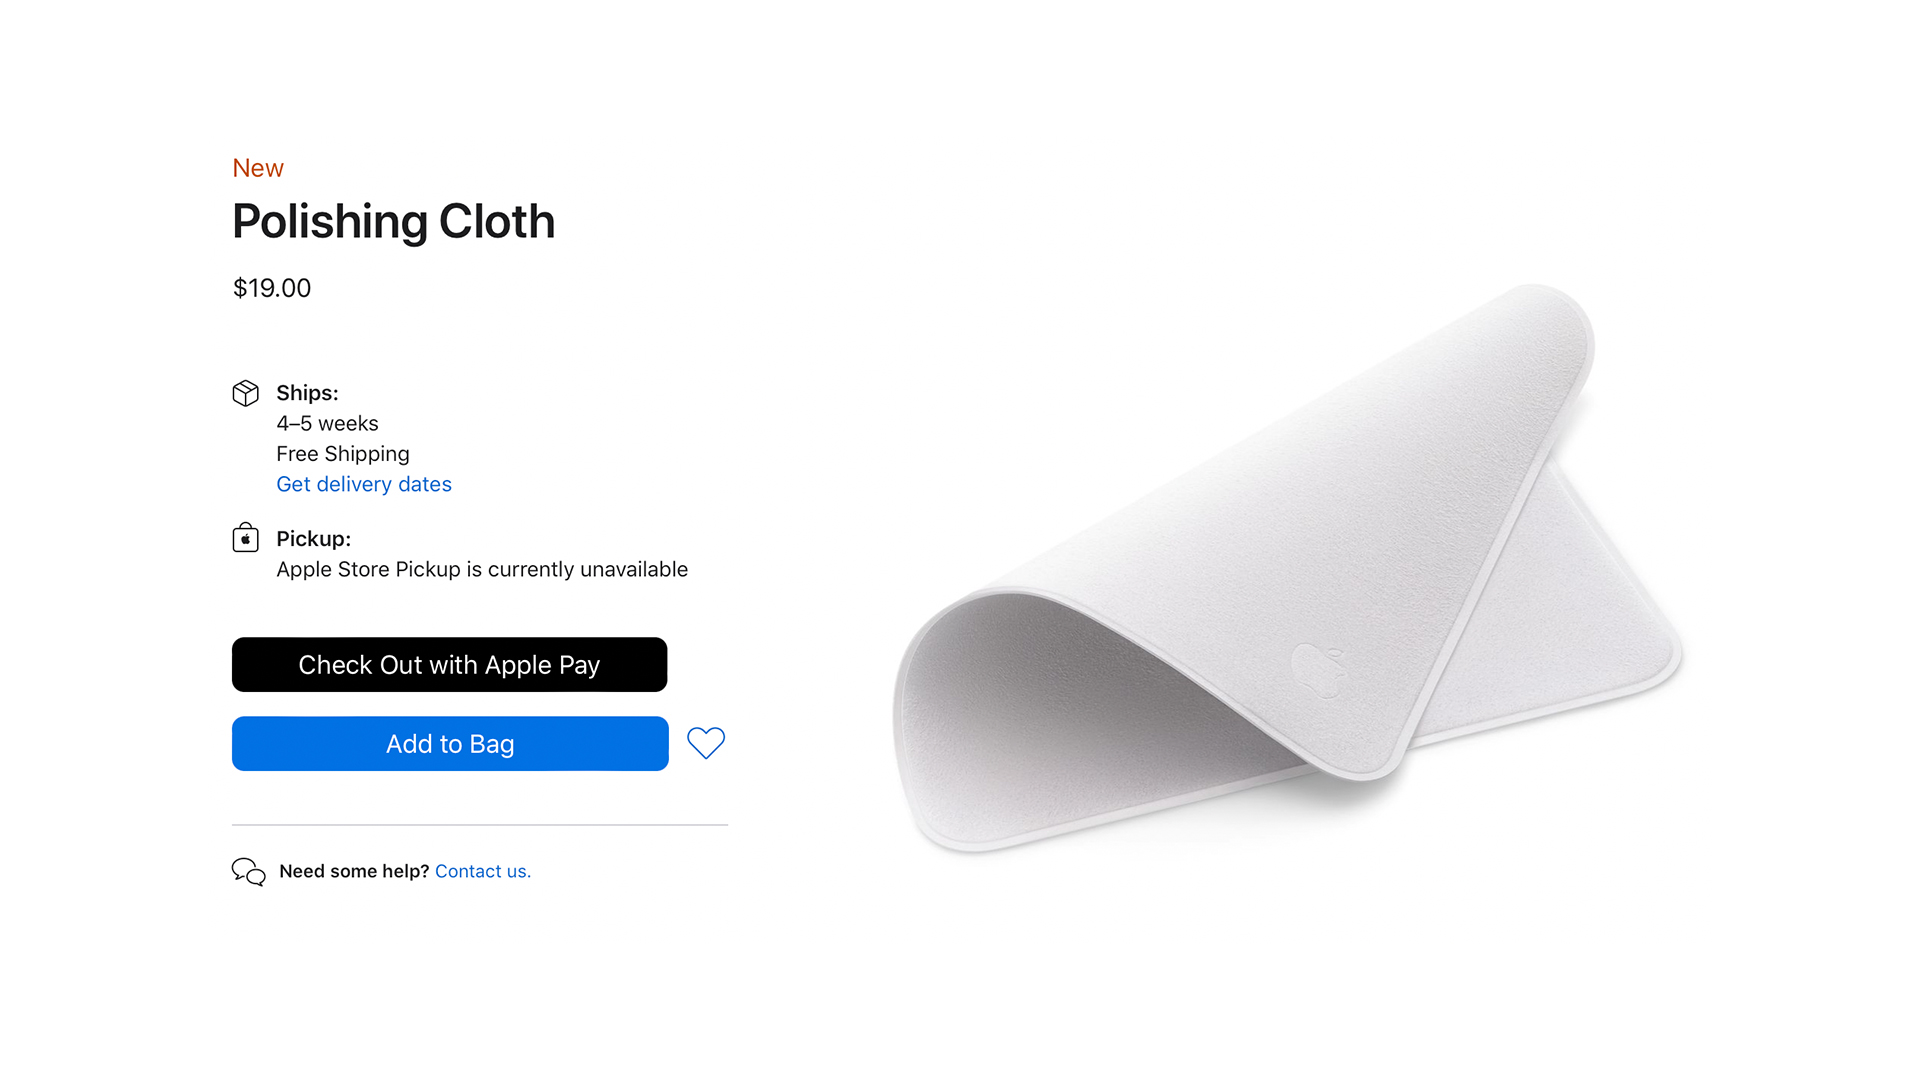 Review: Apple's polishing cloth is the new gold standard for